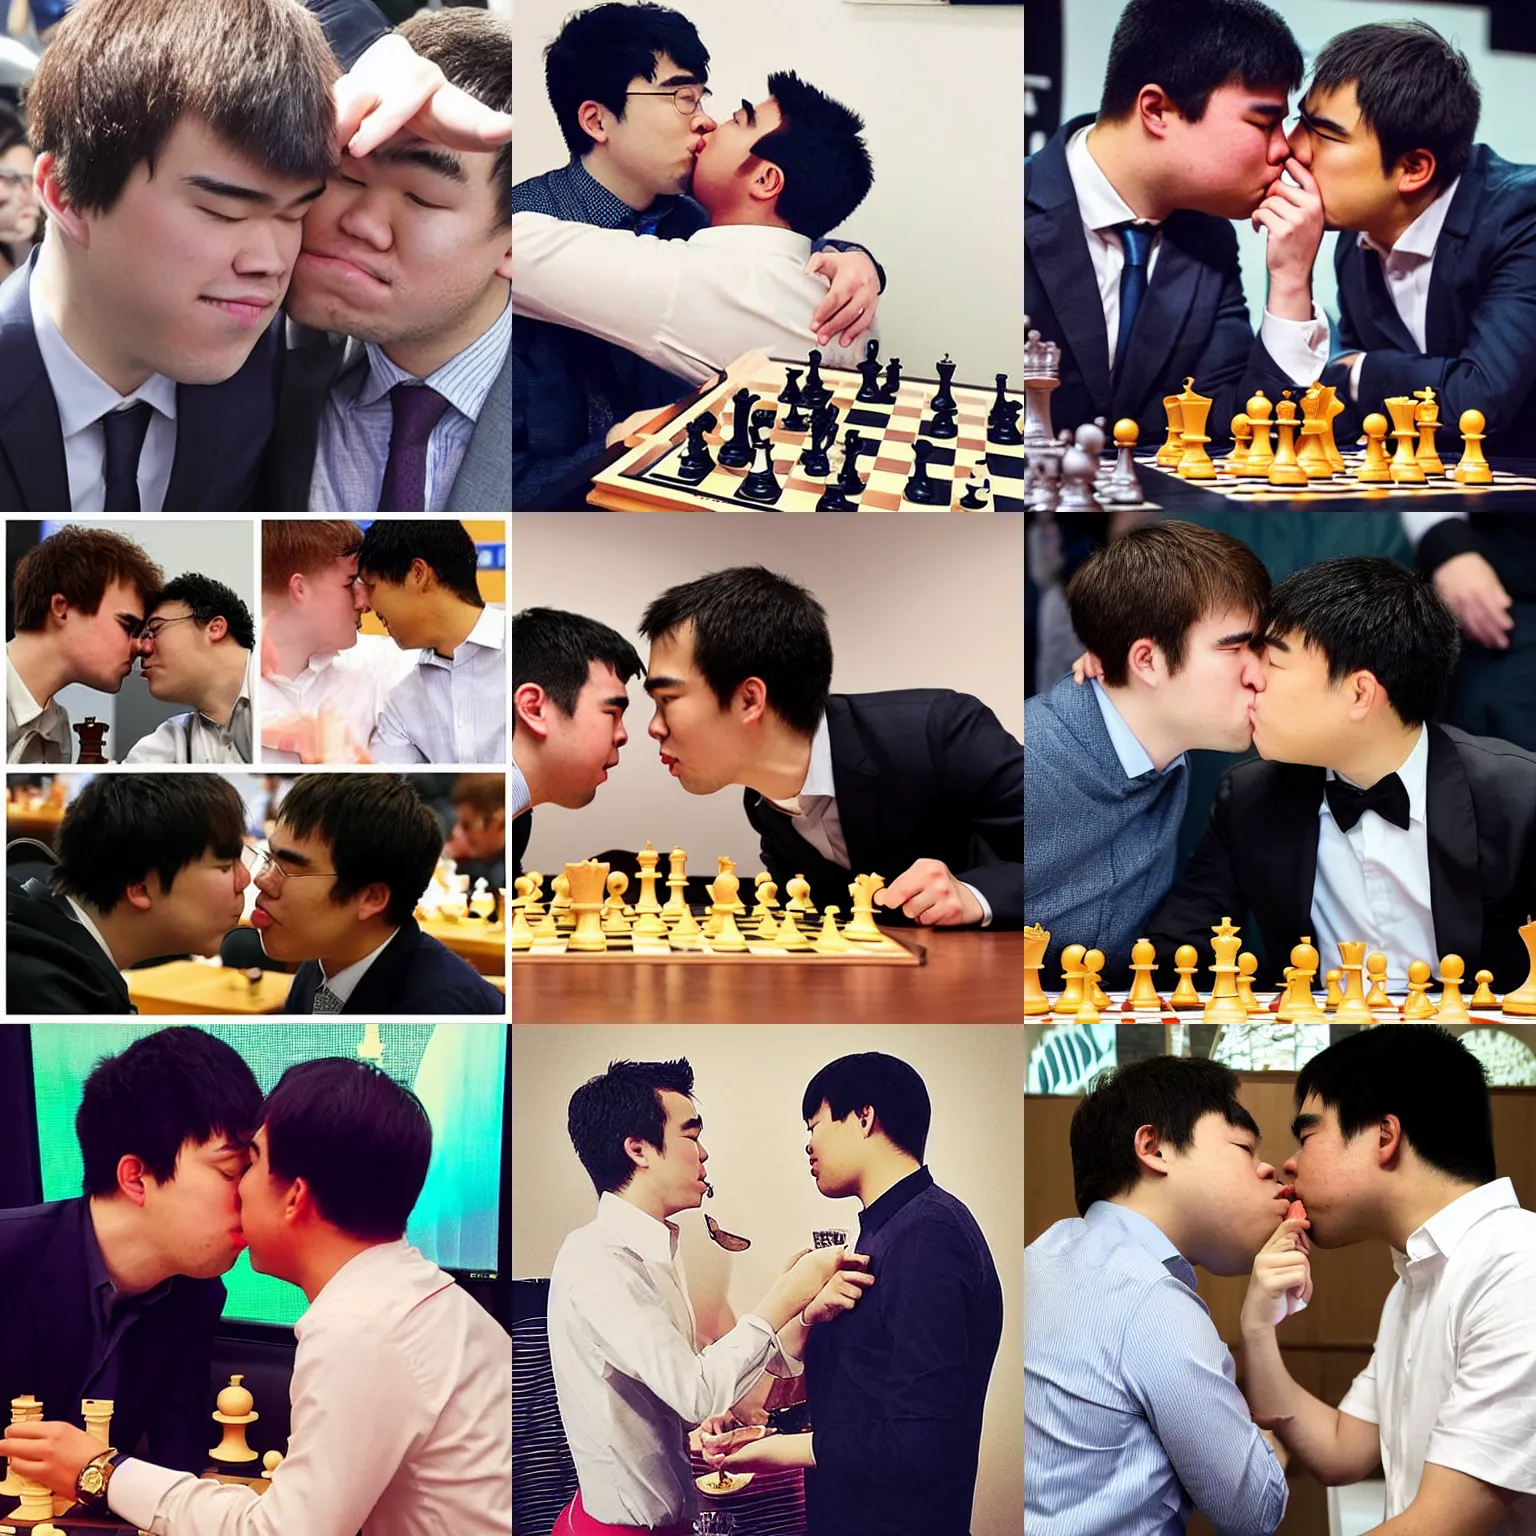 Magnus Carlsen playing chess with Hikaru Nakamura in, Stable Diffusion